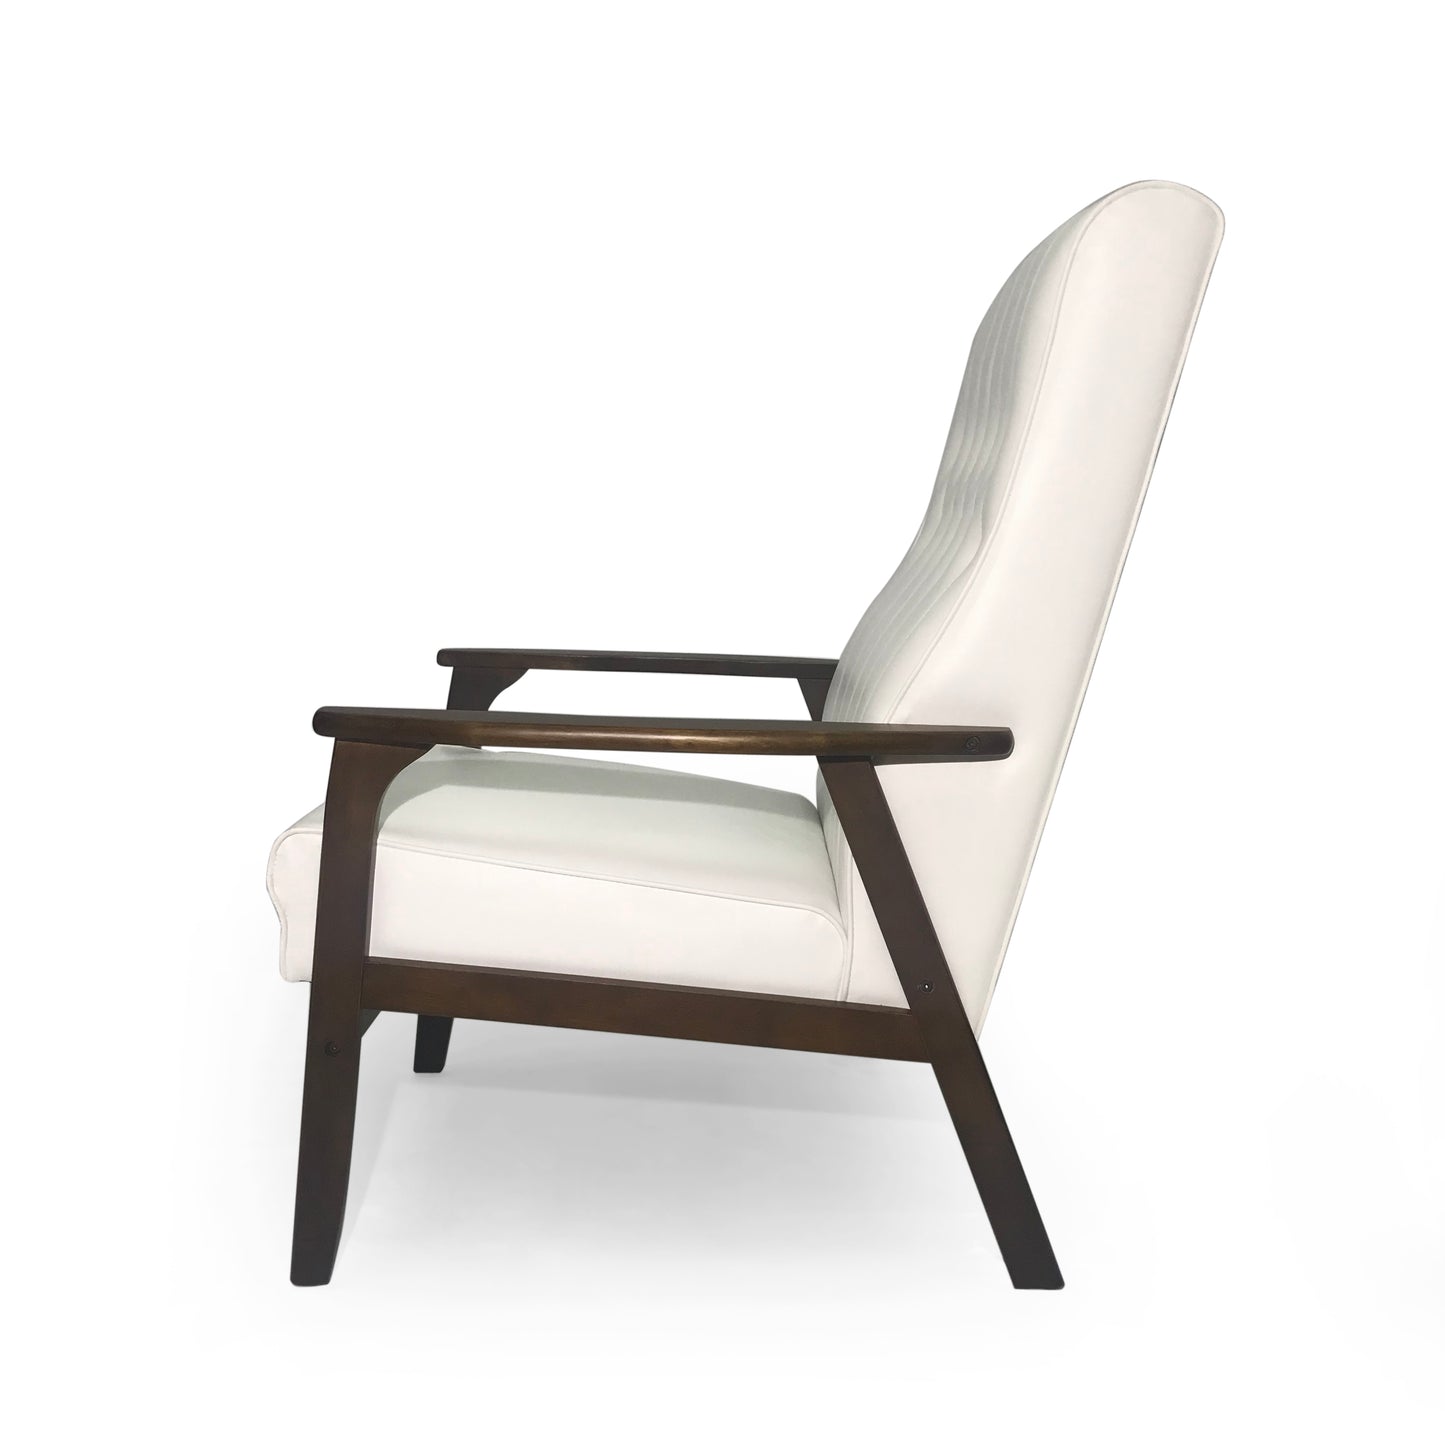 Katharine Mid-Century Faux Leather Modern Accent Chair